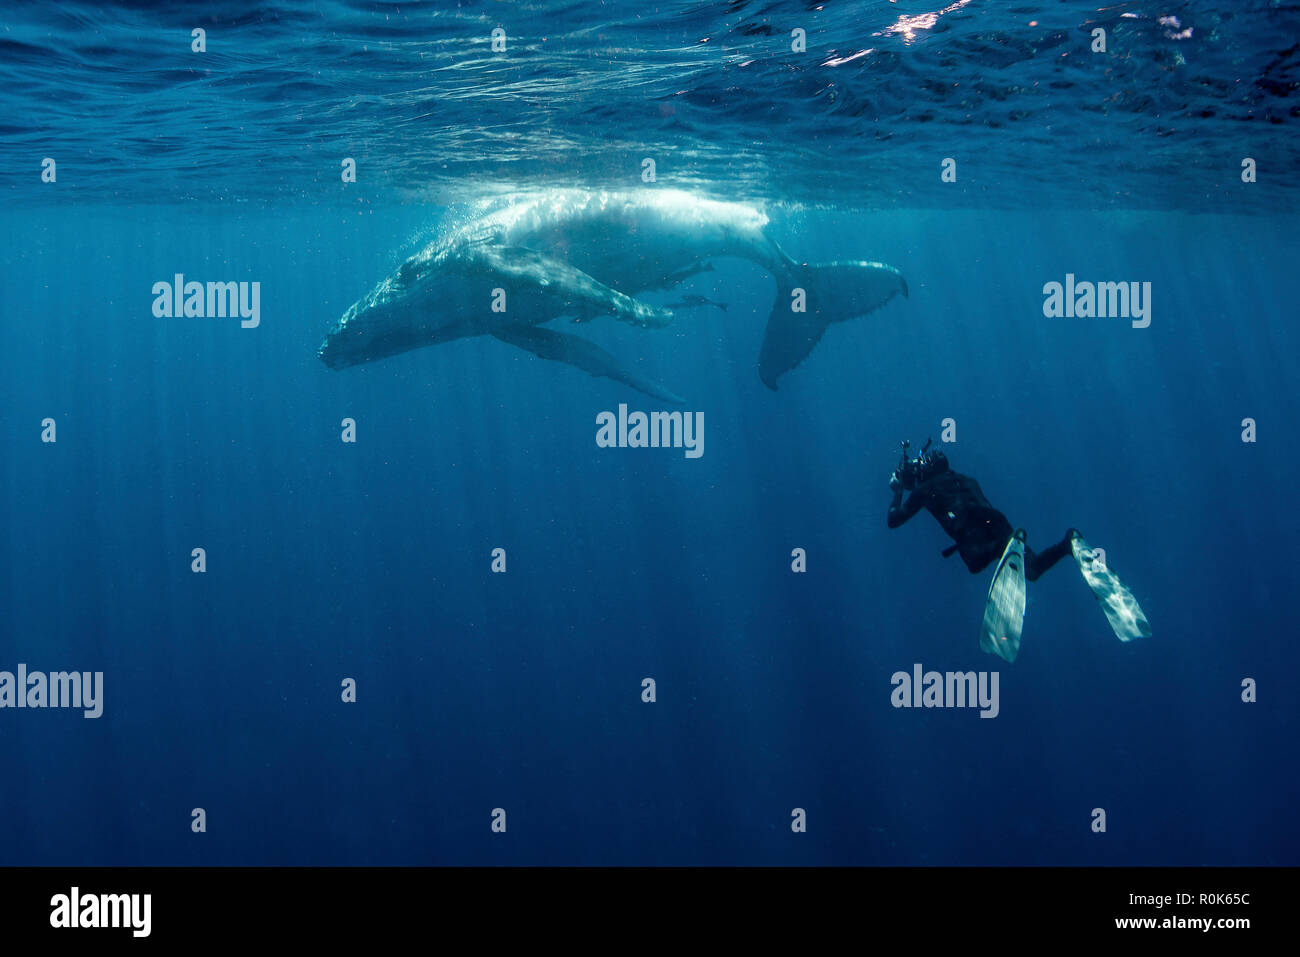 A diver photographs a baby whale at the surface. Stock Photo